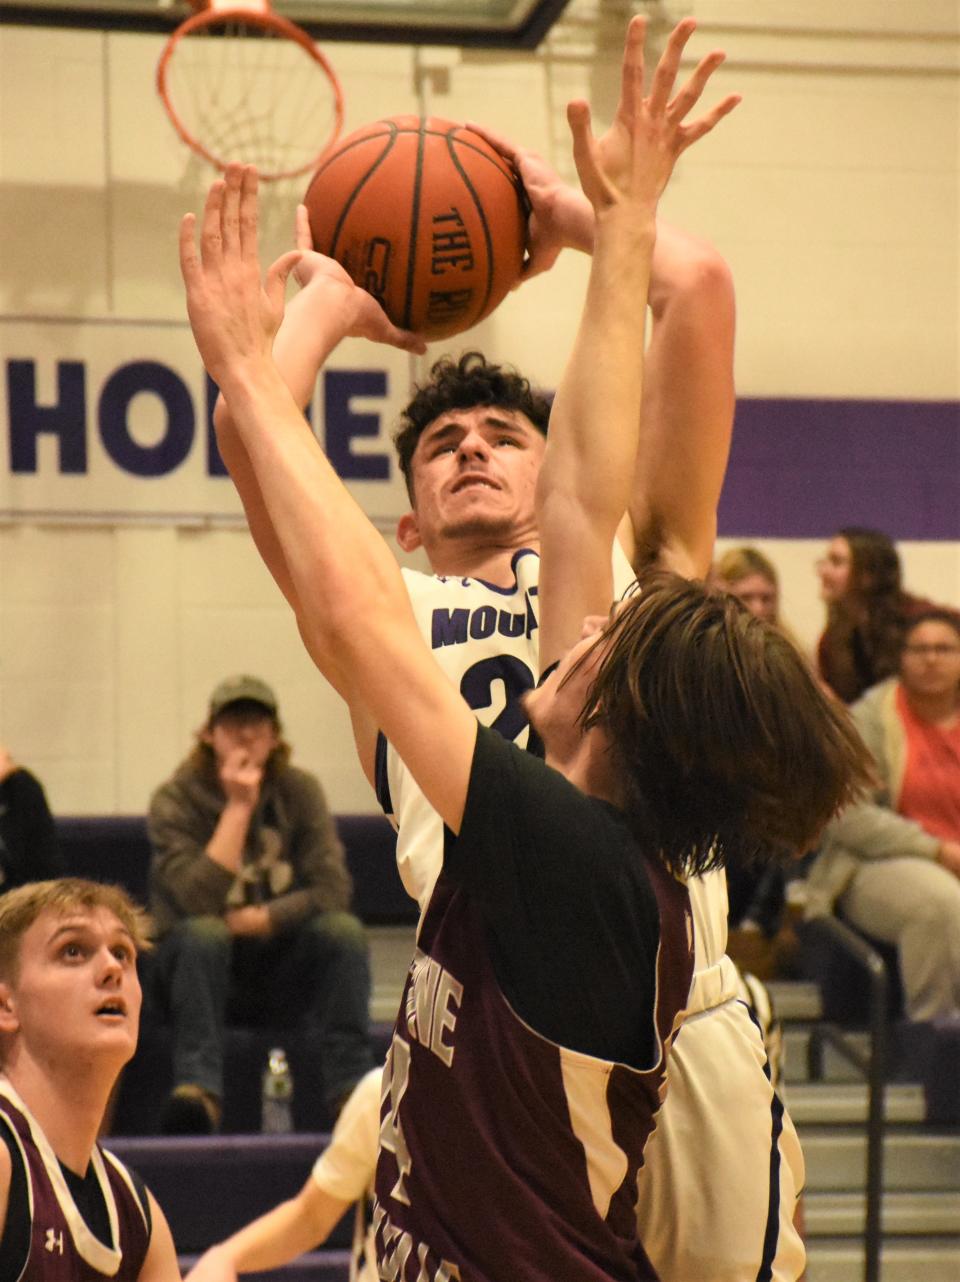 Derek Milianta goes back up with a shot after grabbing an offensive rebound for Little Falls during the Mounties' Section III playoff victory over Sherburne-Earlville Wednesday.